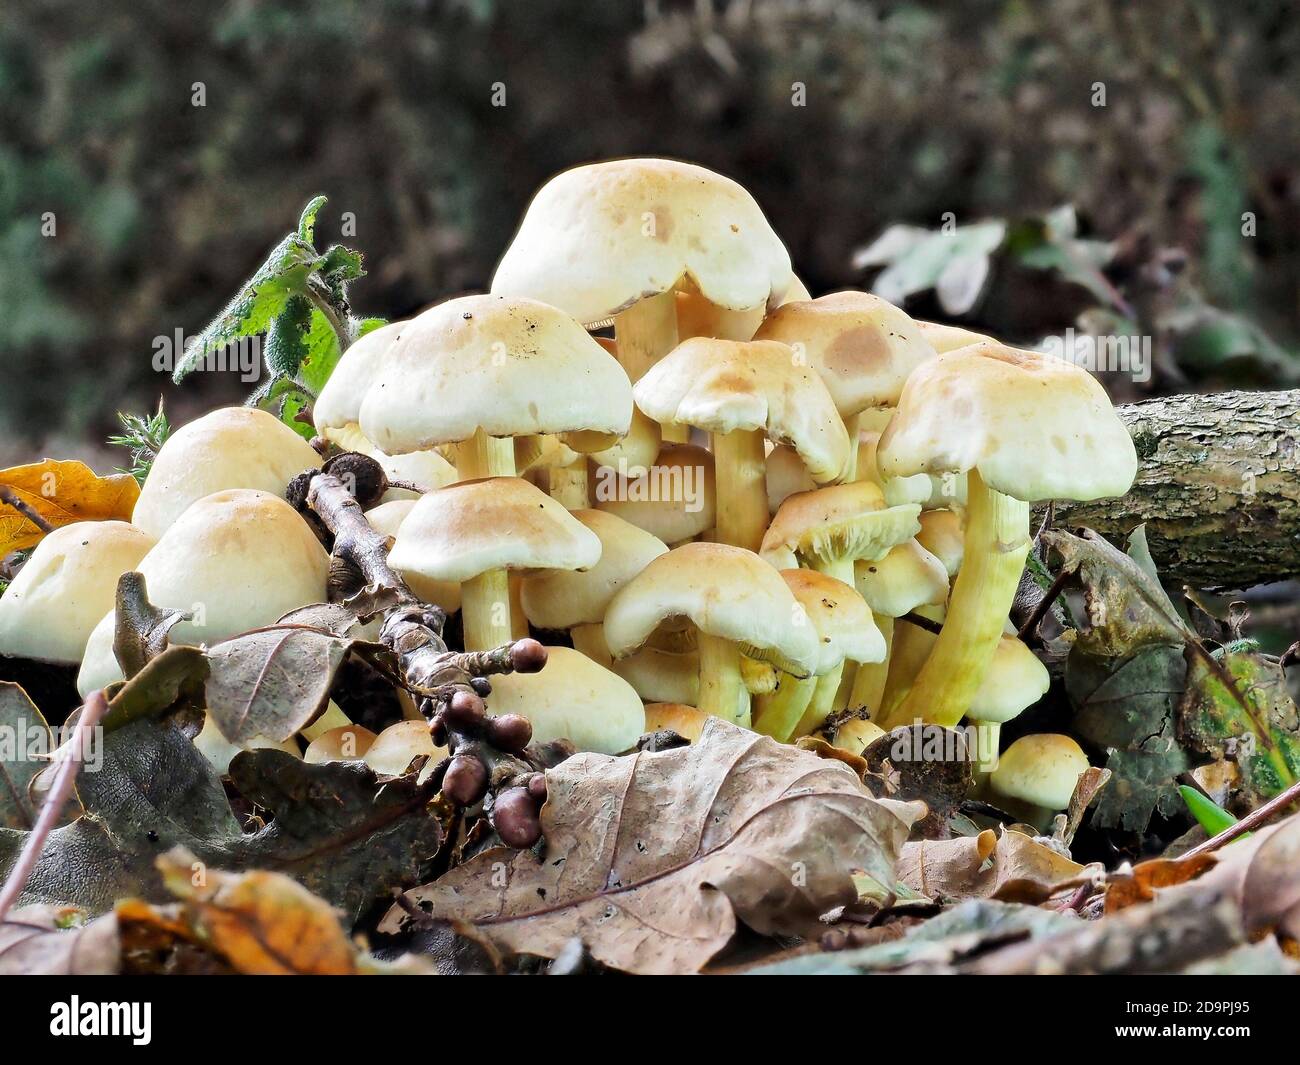 A clump of Watery Hypholoma toadstools (Psathyrella hydrophila) growing on decaying and part buried wood. Stock Photo